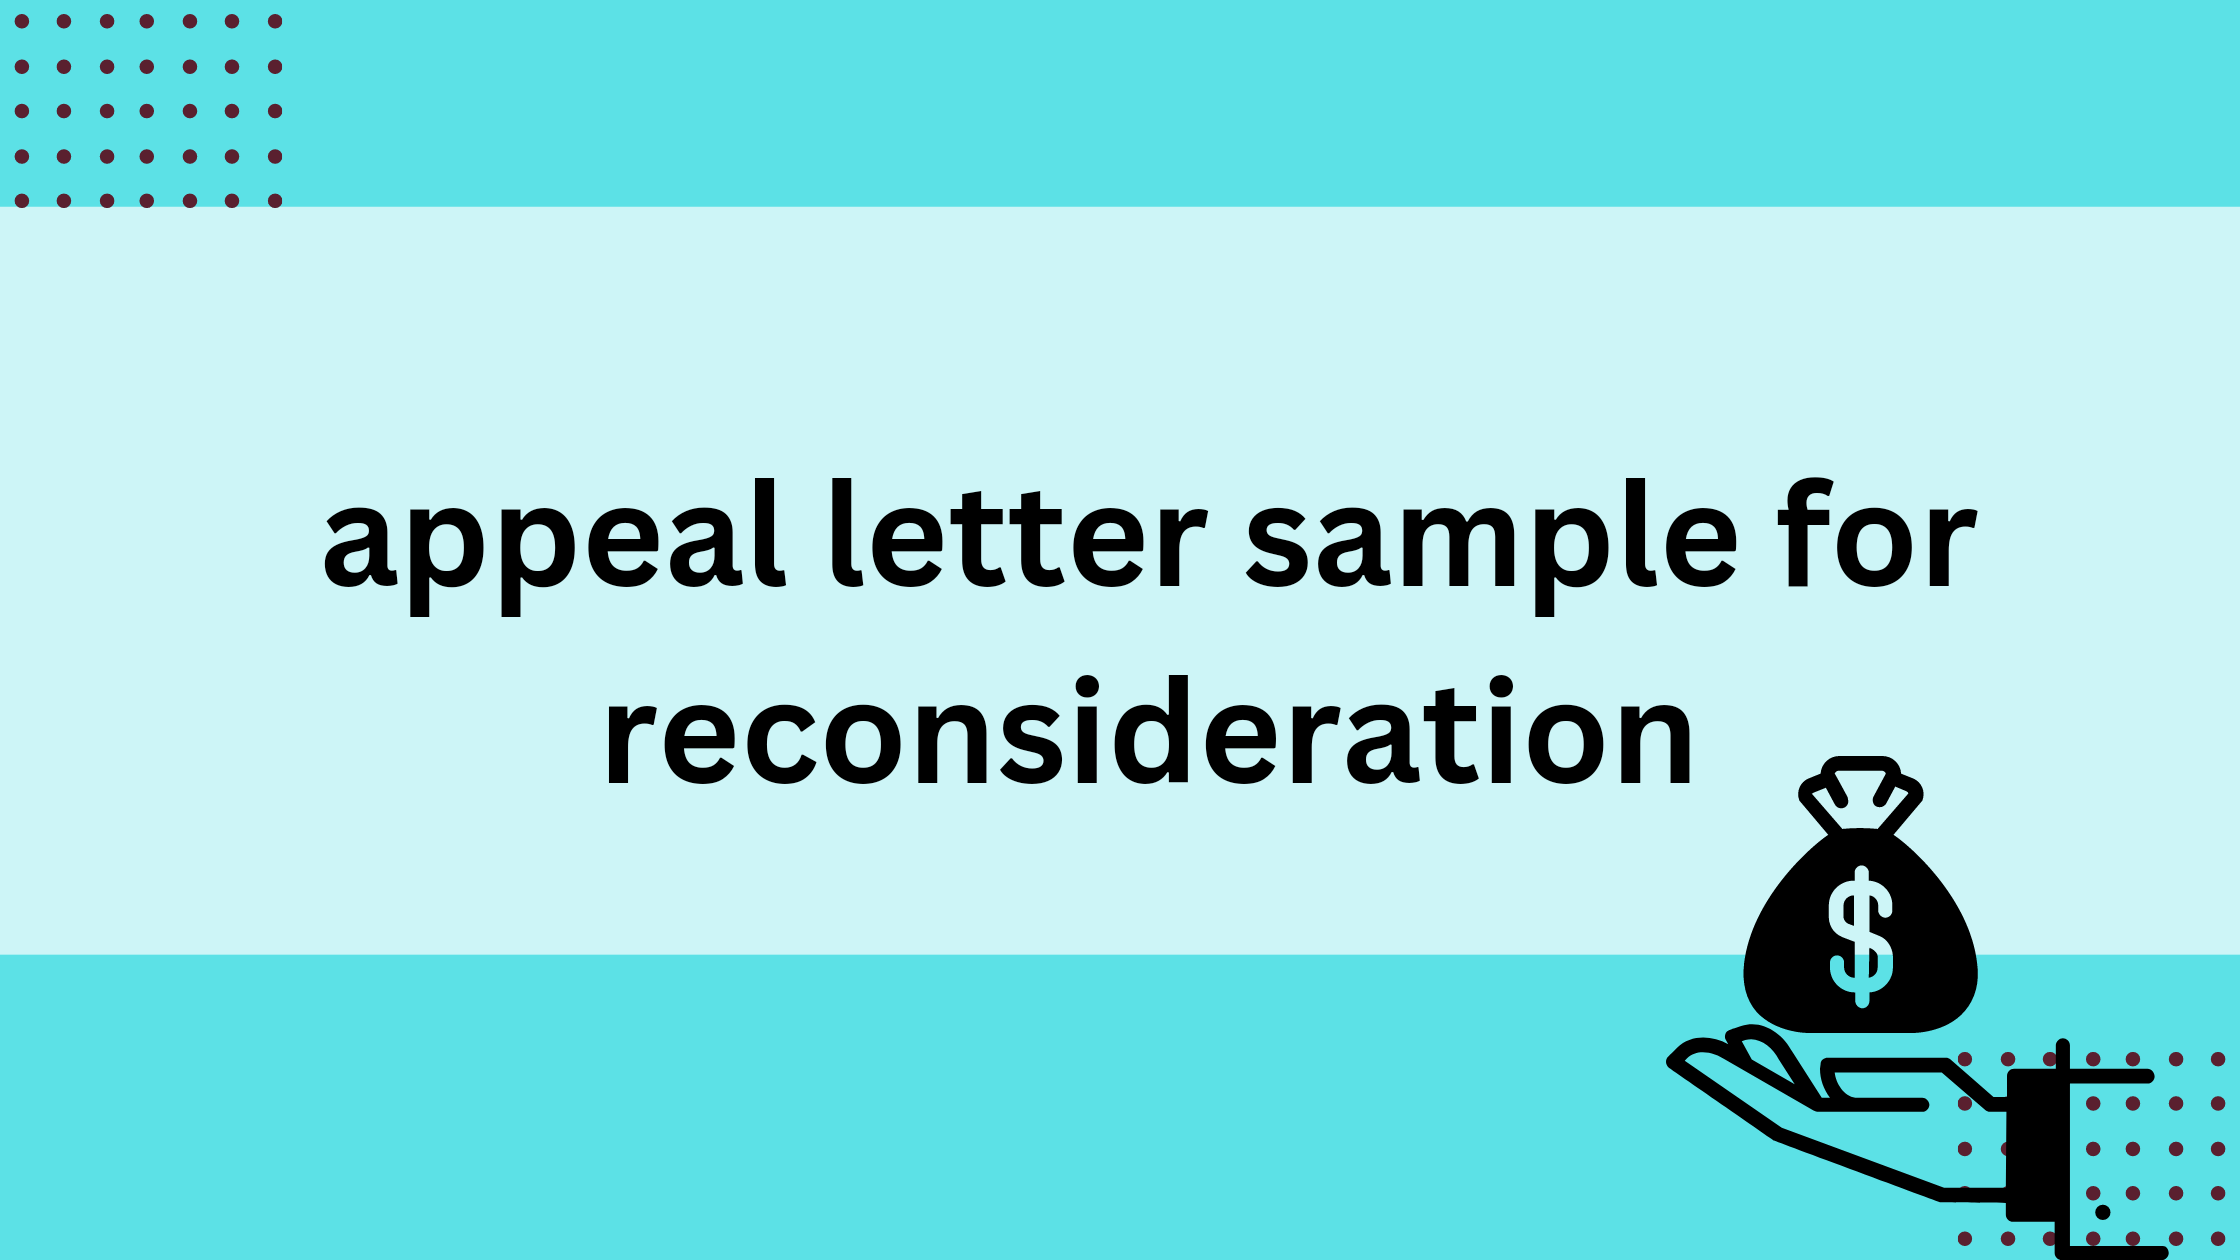 appeal letter sample for reconsideration